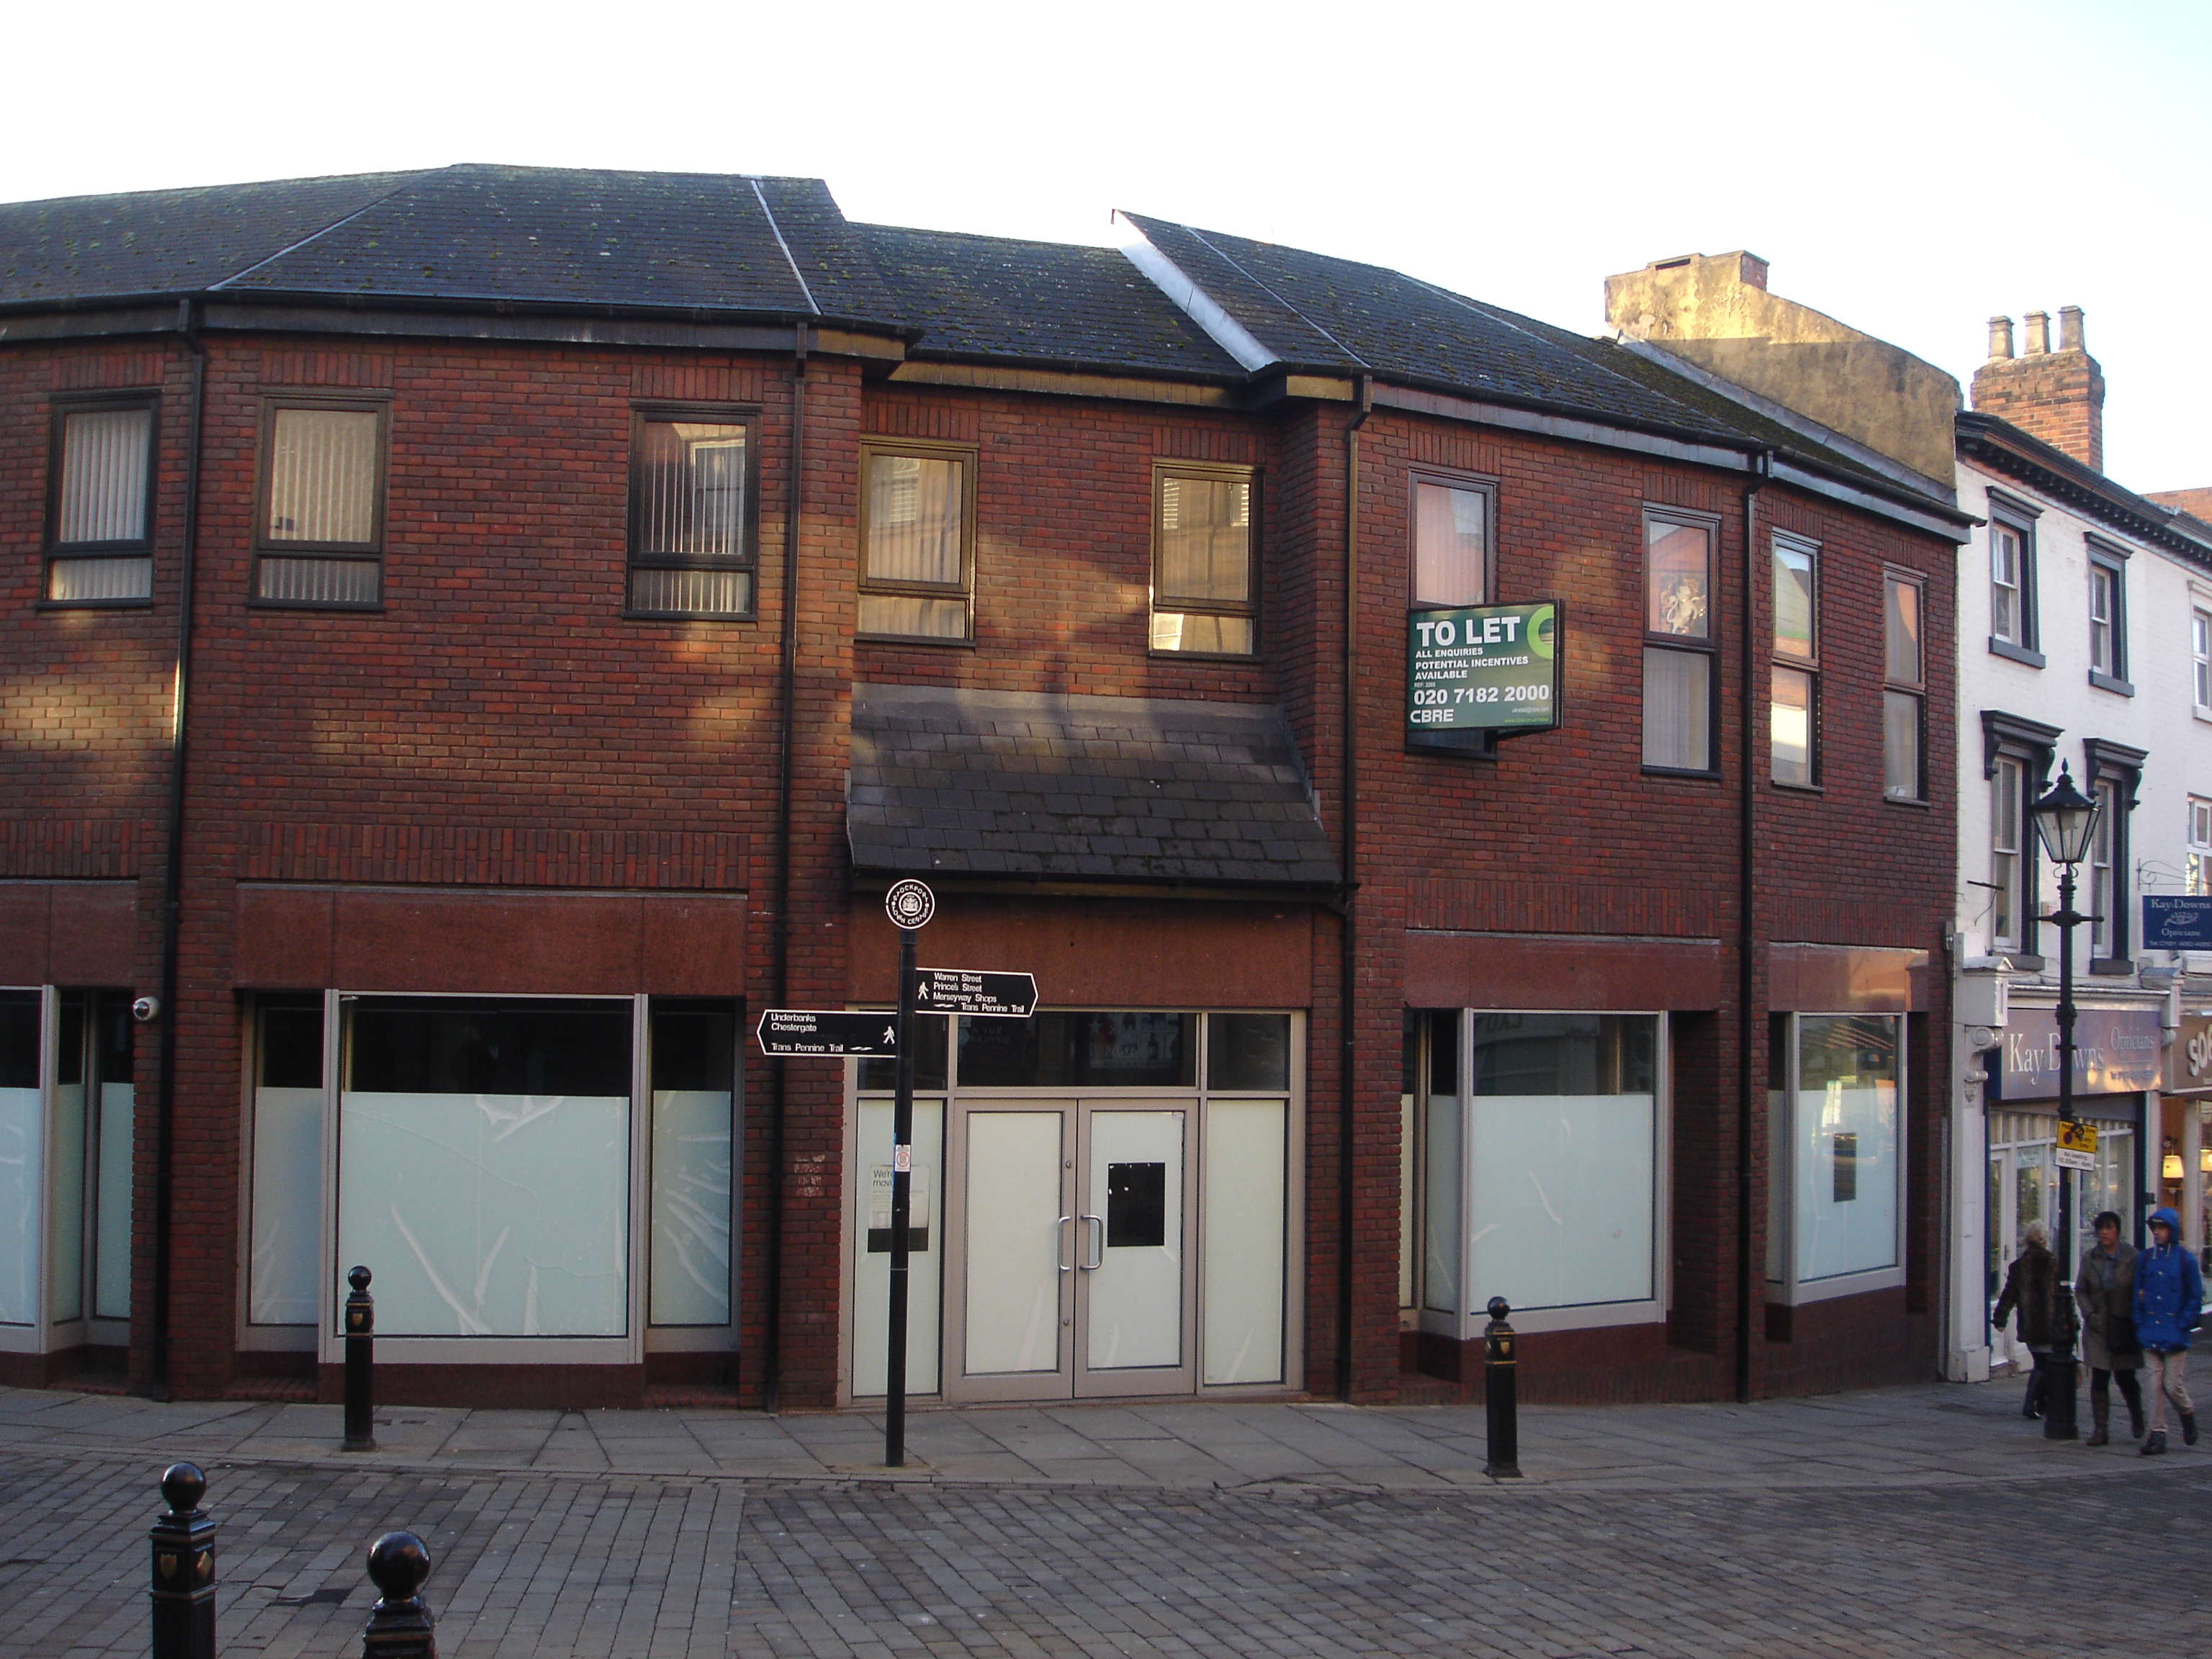 2 Great Underbank, Stockport (completed)